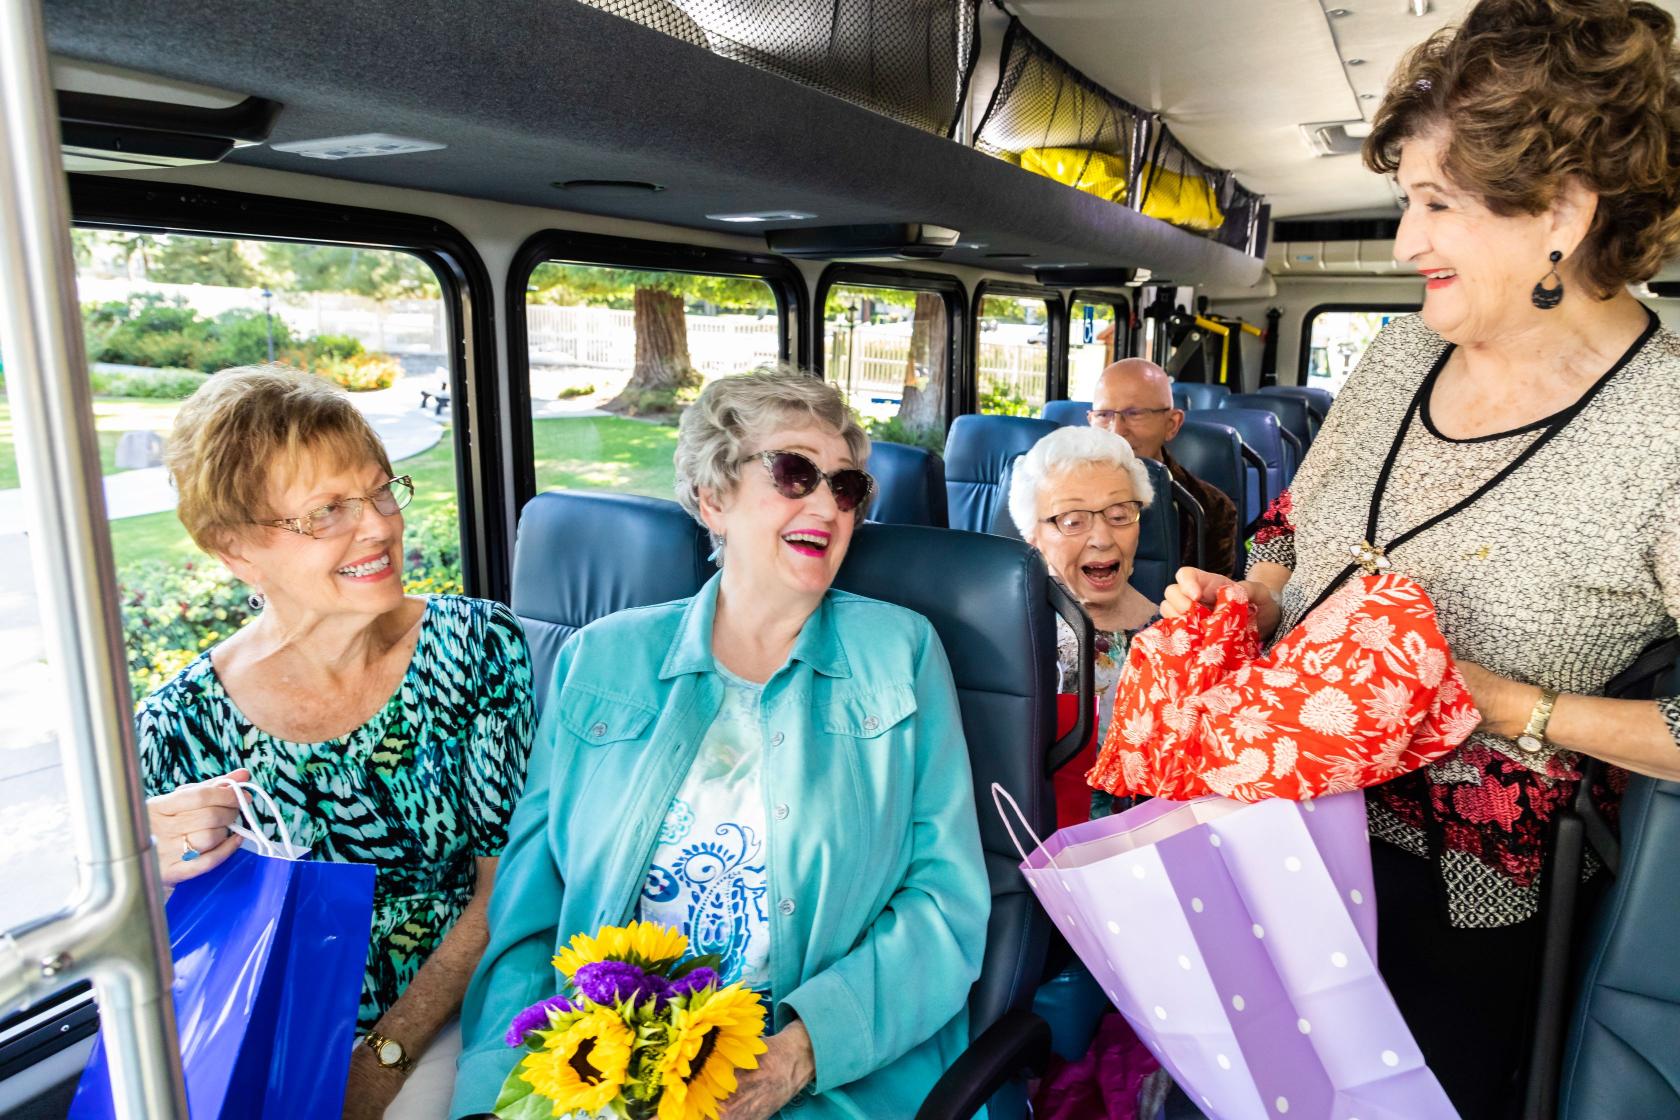 Ladies at the bus holding shopping bags